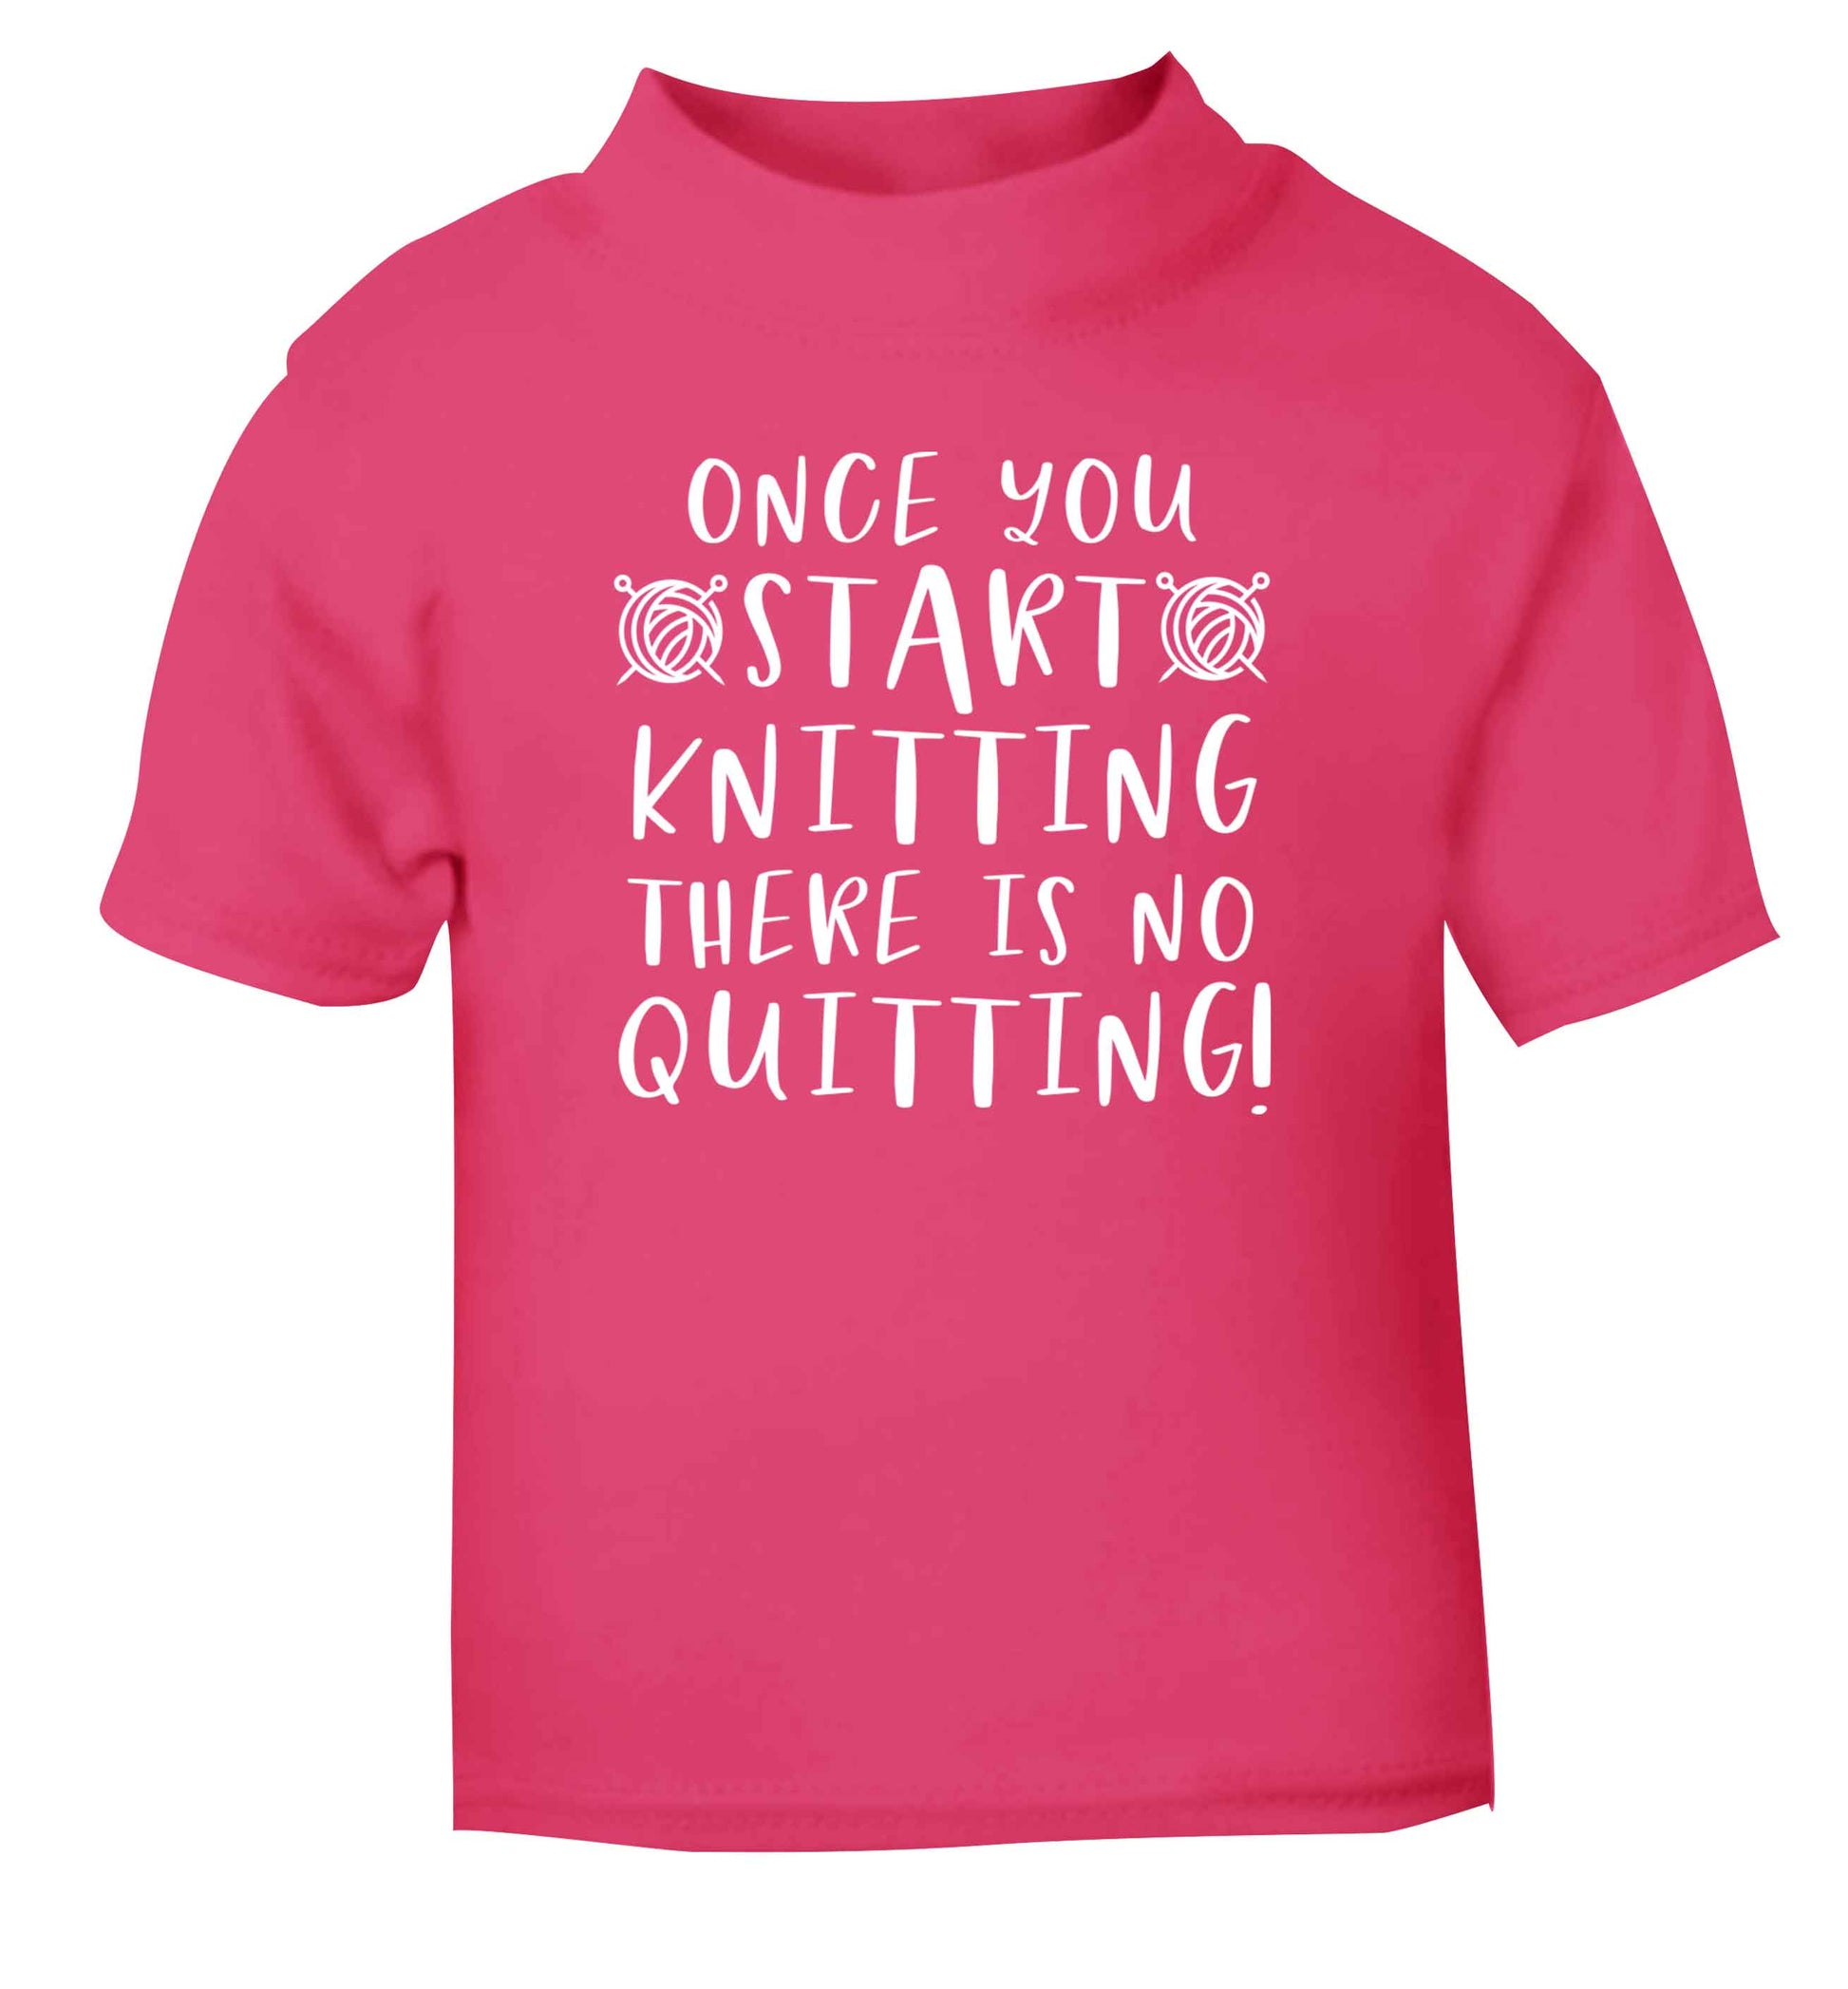 Once you start knitting there is no quitting! pink Baby Toddler Tshirt 2 Years